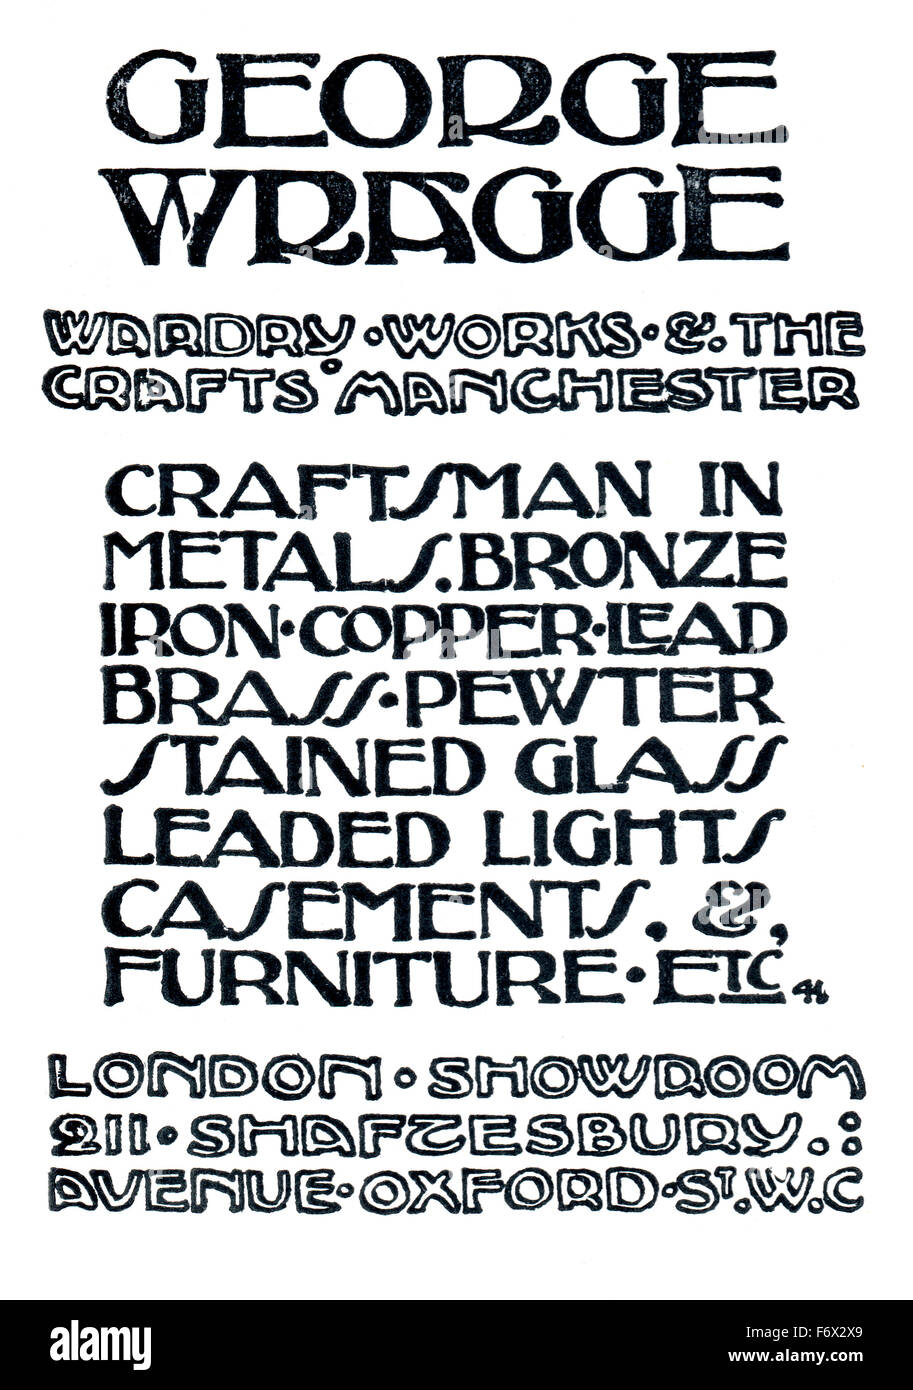 George Wragg, Manchester metalworking 1903 Annonce du Studio Magazine Banque D'Images